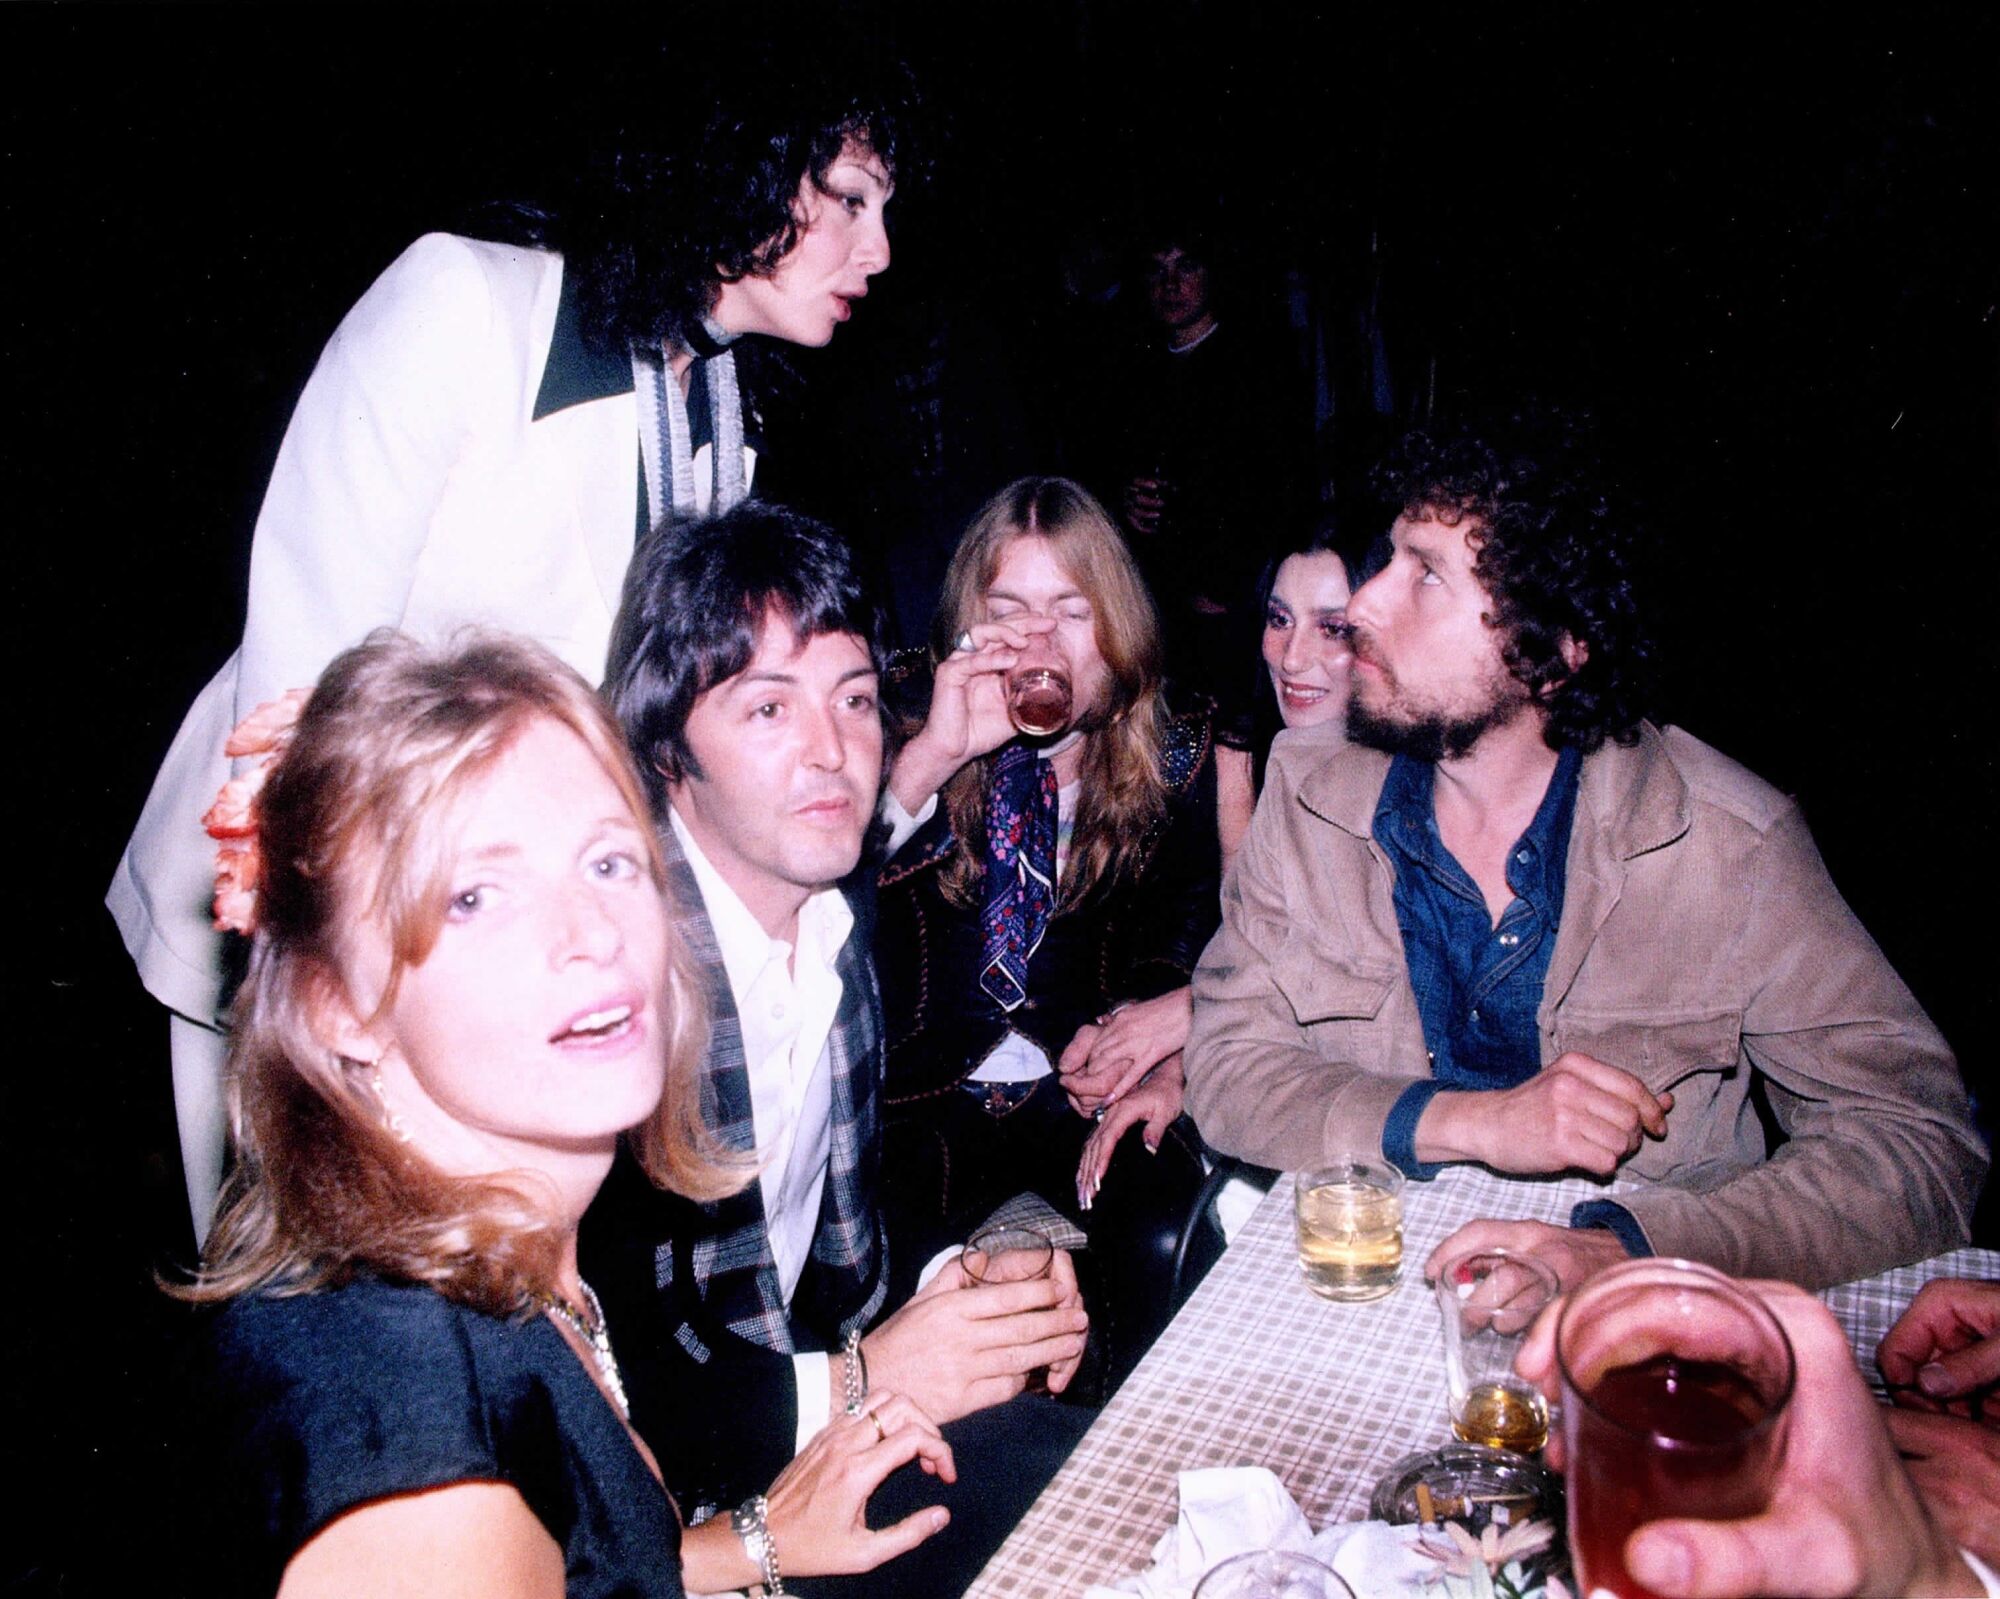 Linda and Paul McCartney, Gregg Allman, Cher, Bob Dylan and Sara Dylan at a party thrown by Rod Stewart.